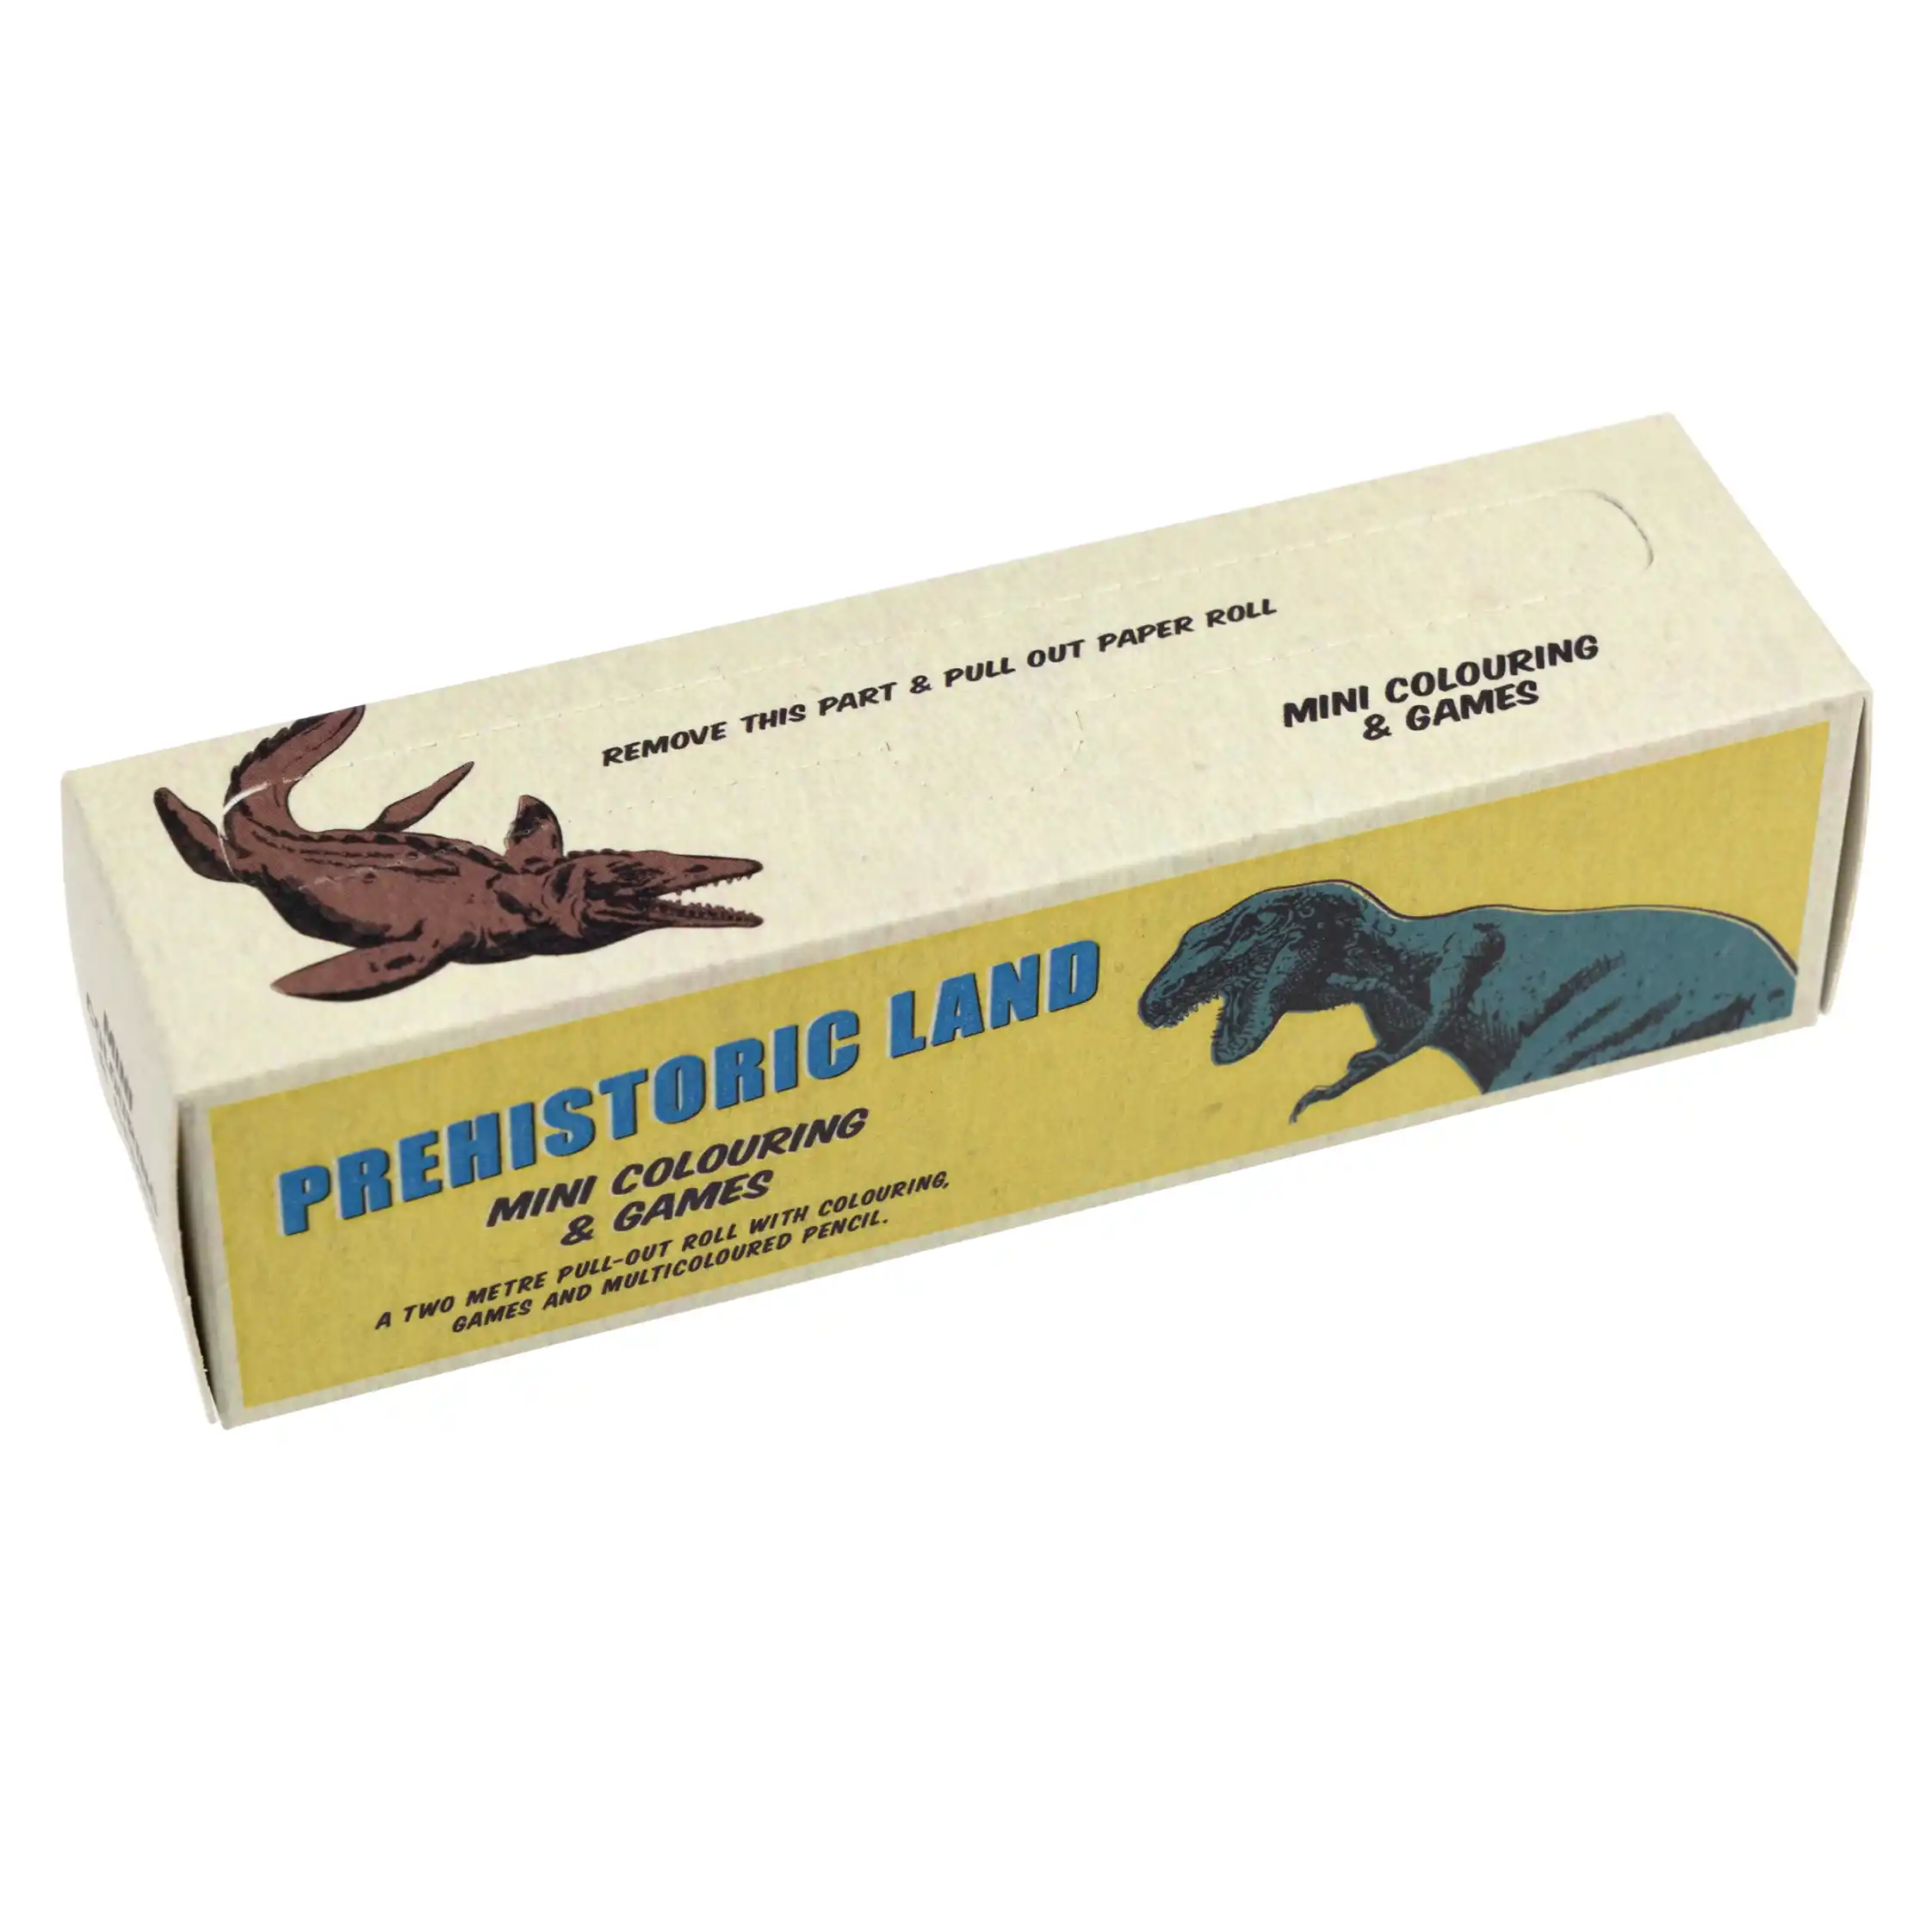 mini colouring and games - prehistoric land